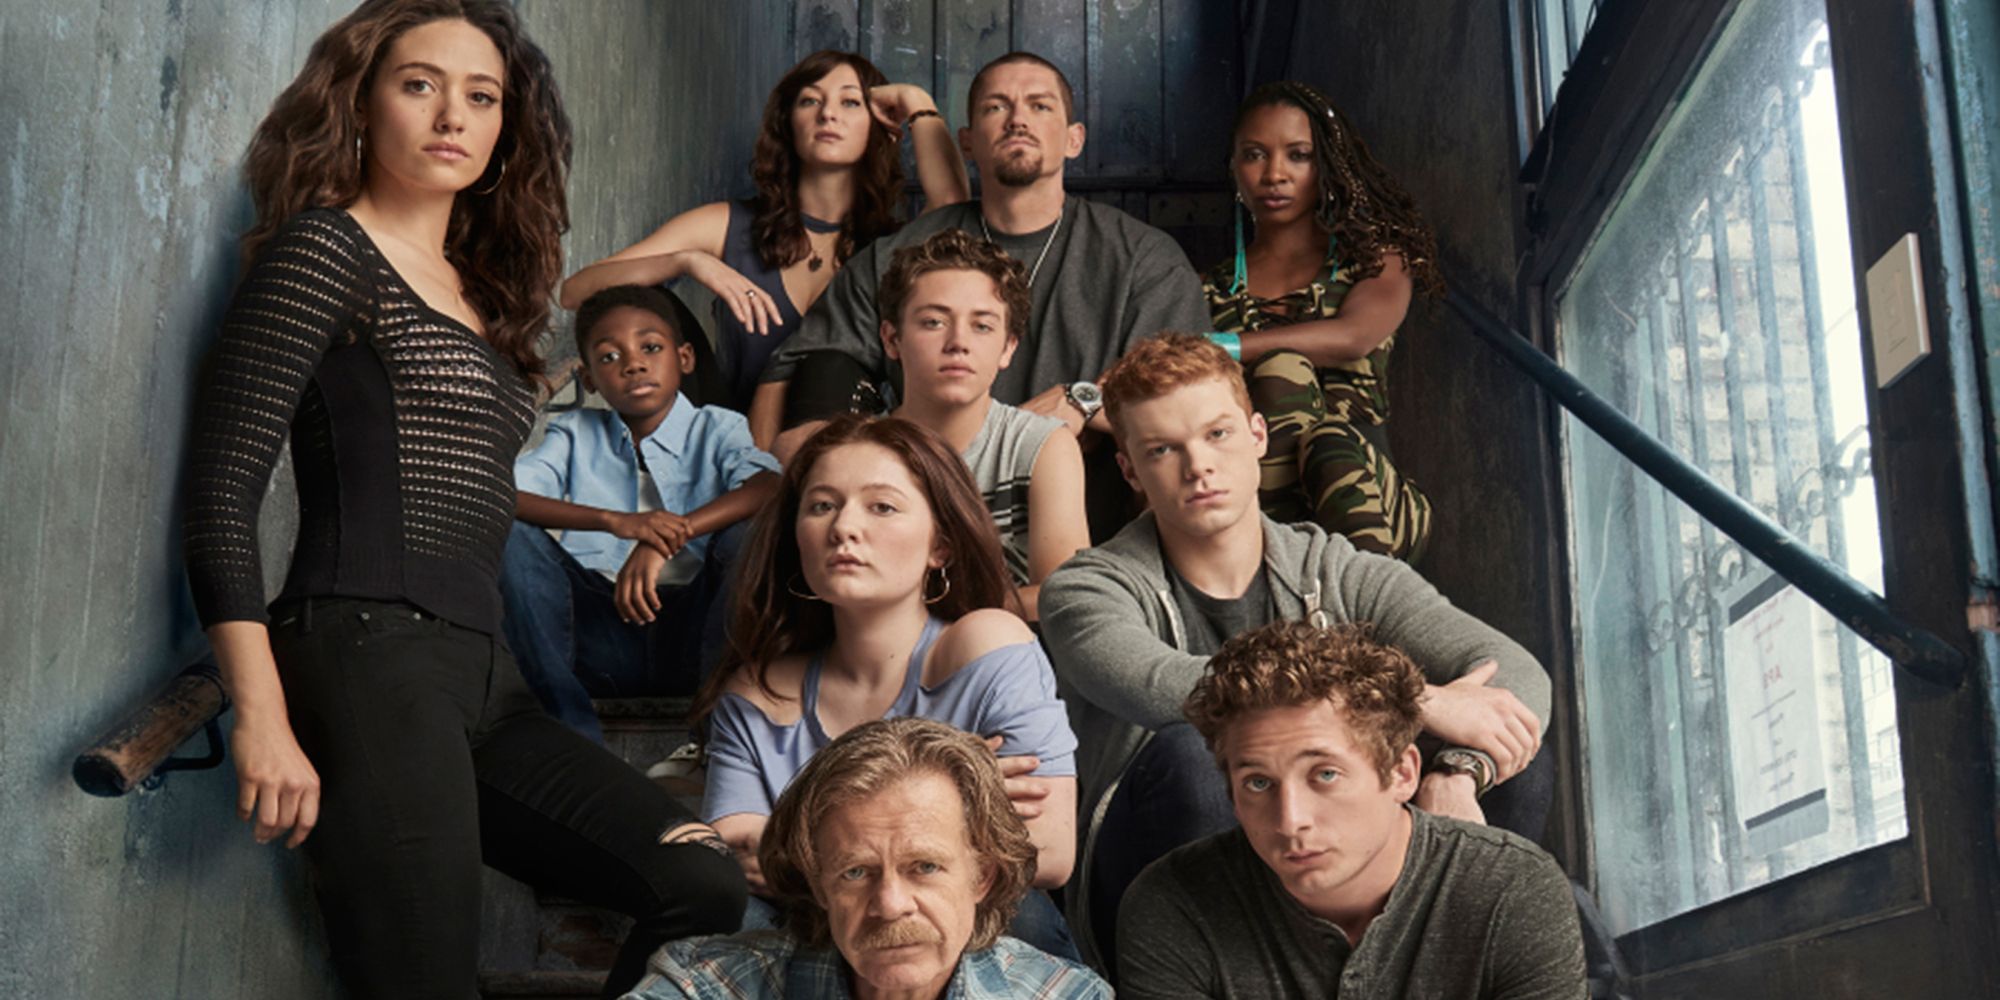 The cast of the television series Shameless.